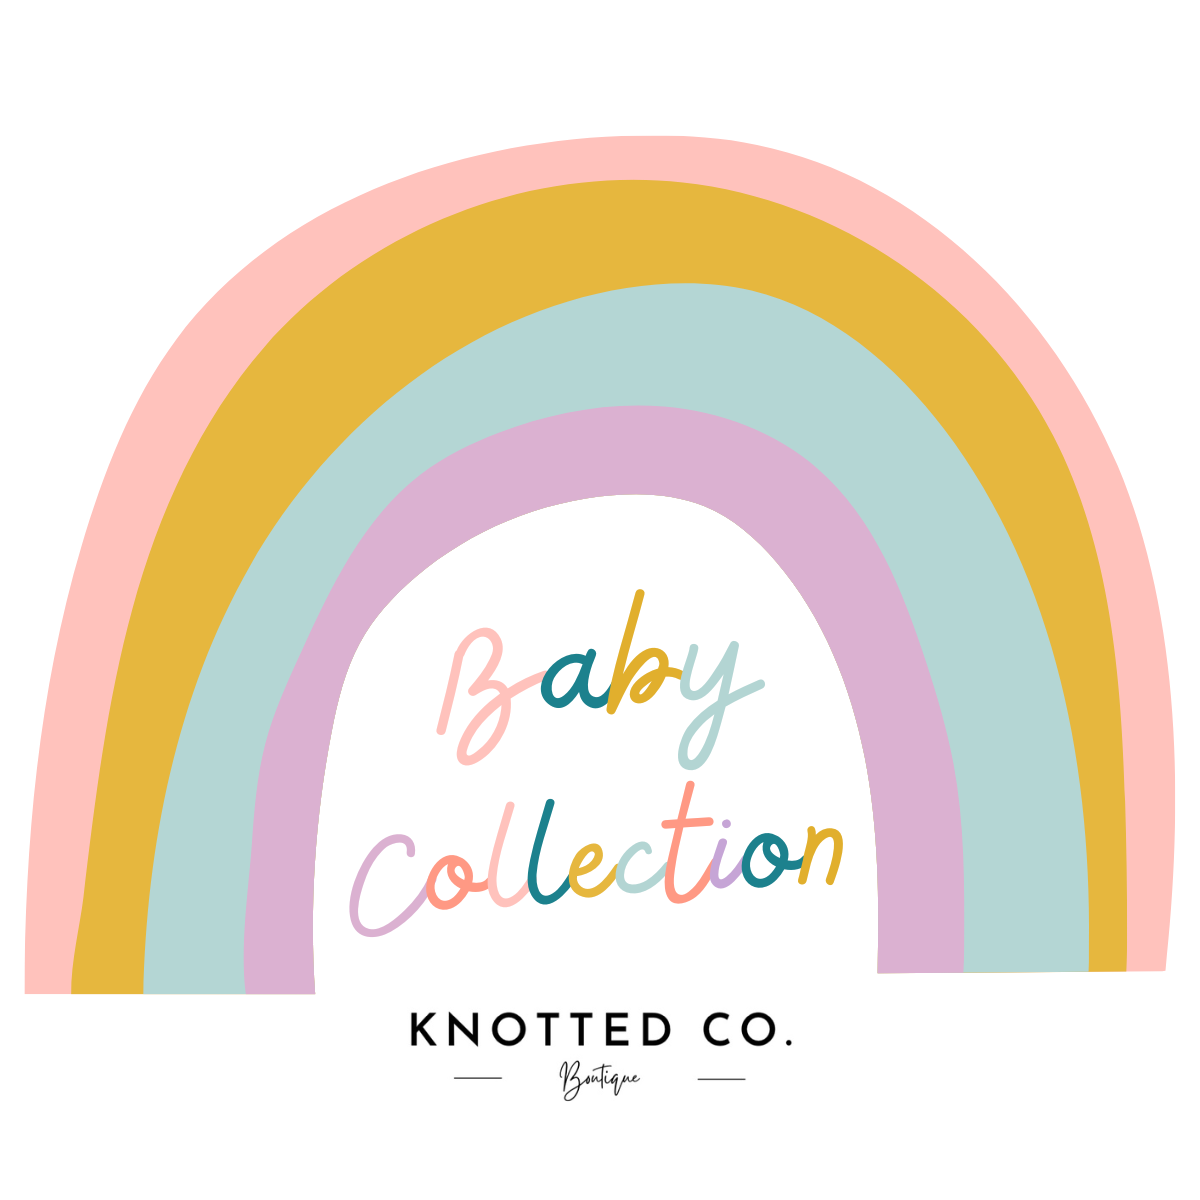 Baby Collection